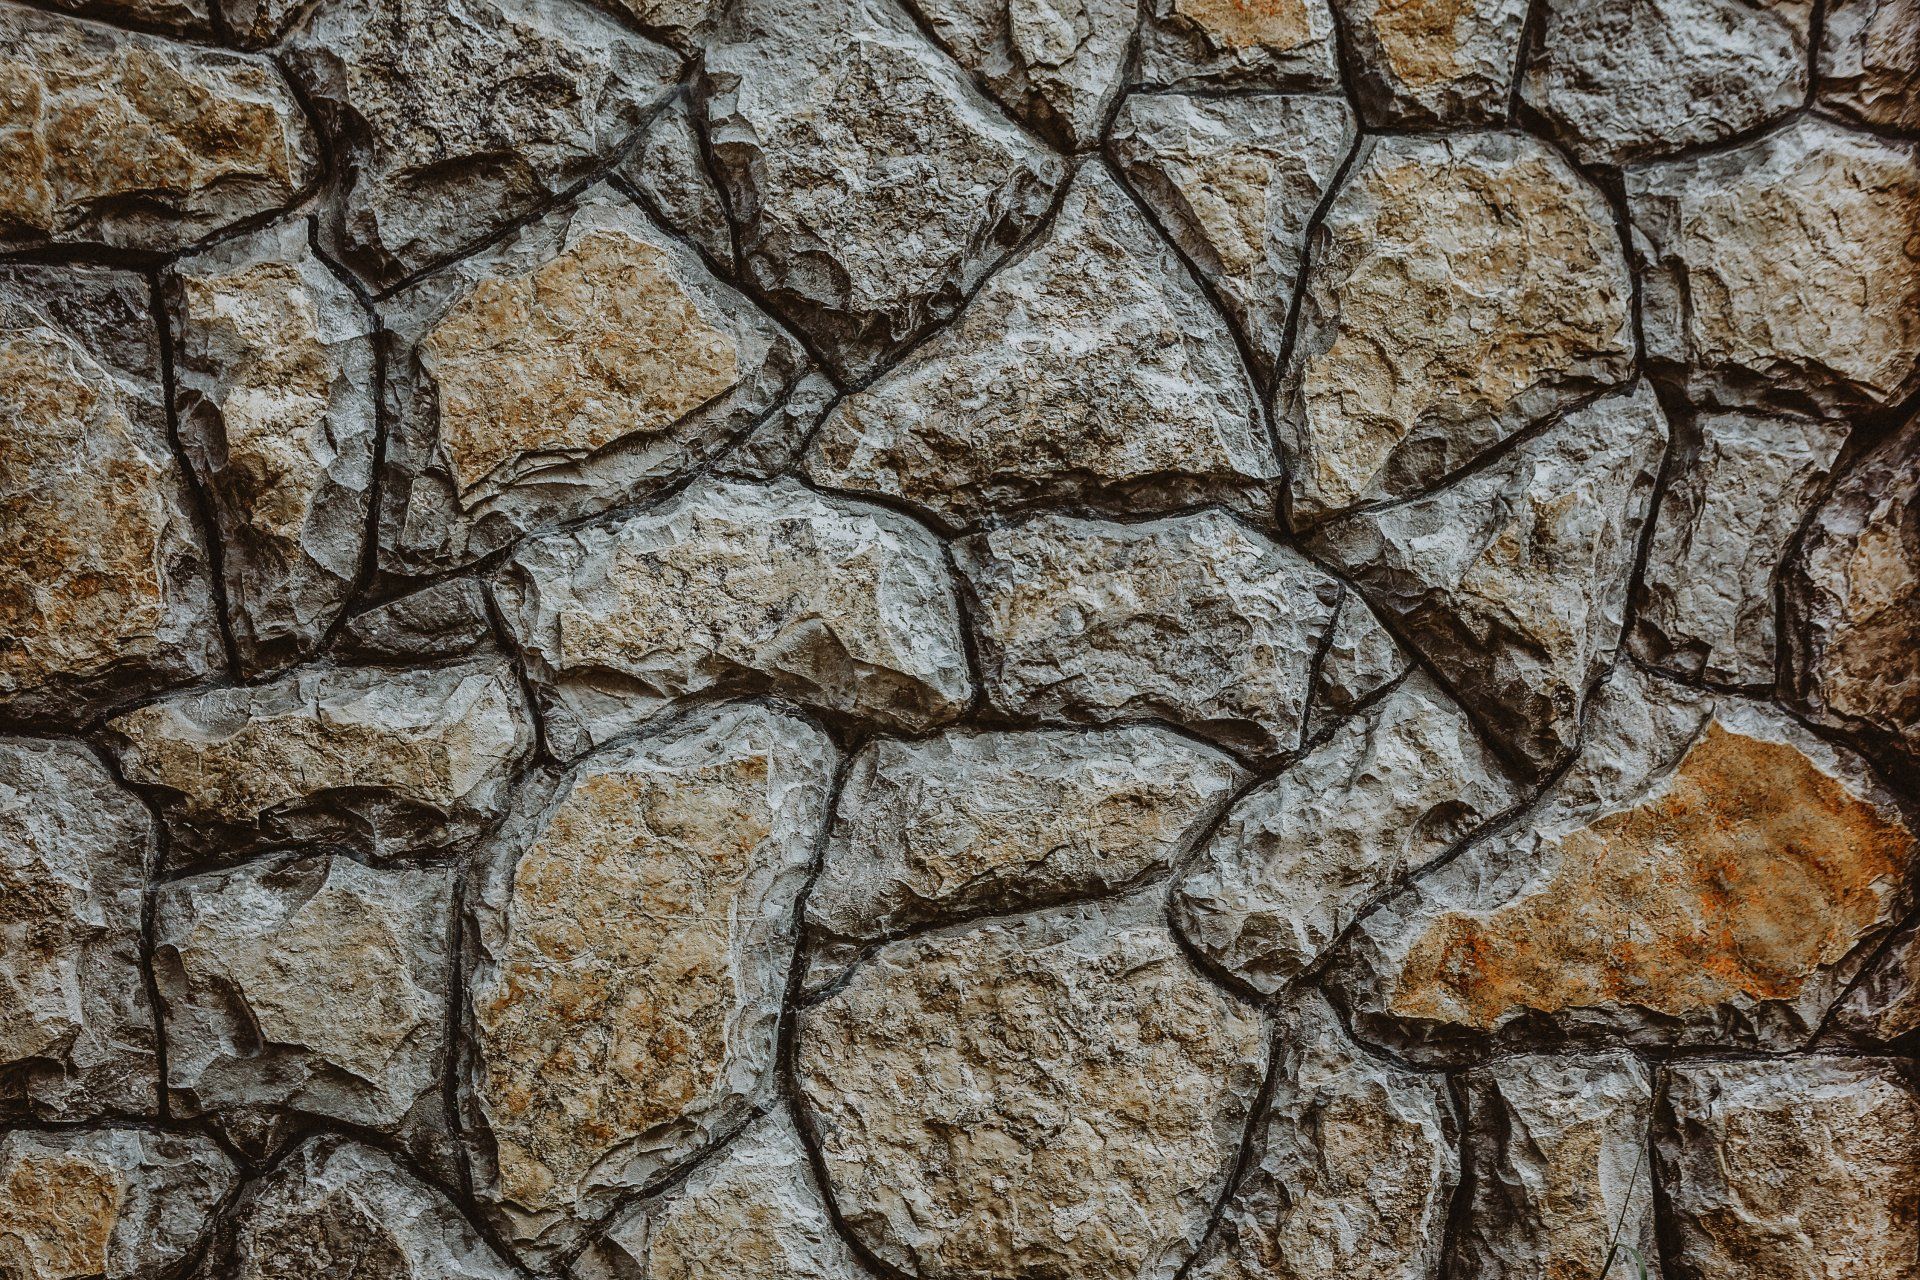 Close-up of a rustic stone wall texture, showcasing the natural patterns and earthy colors of the stones.